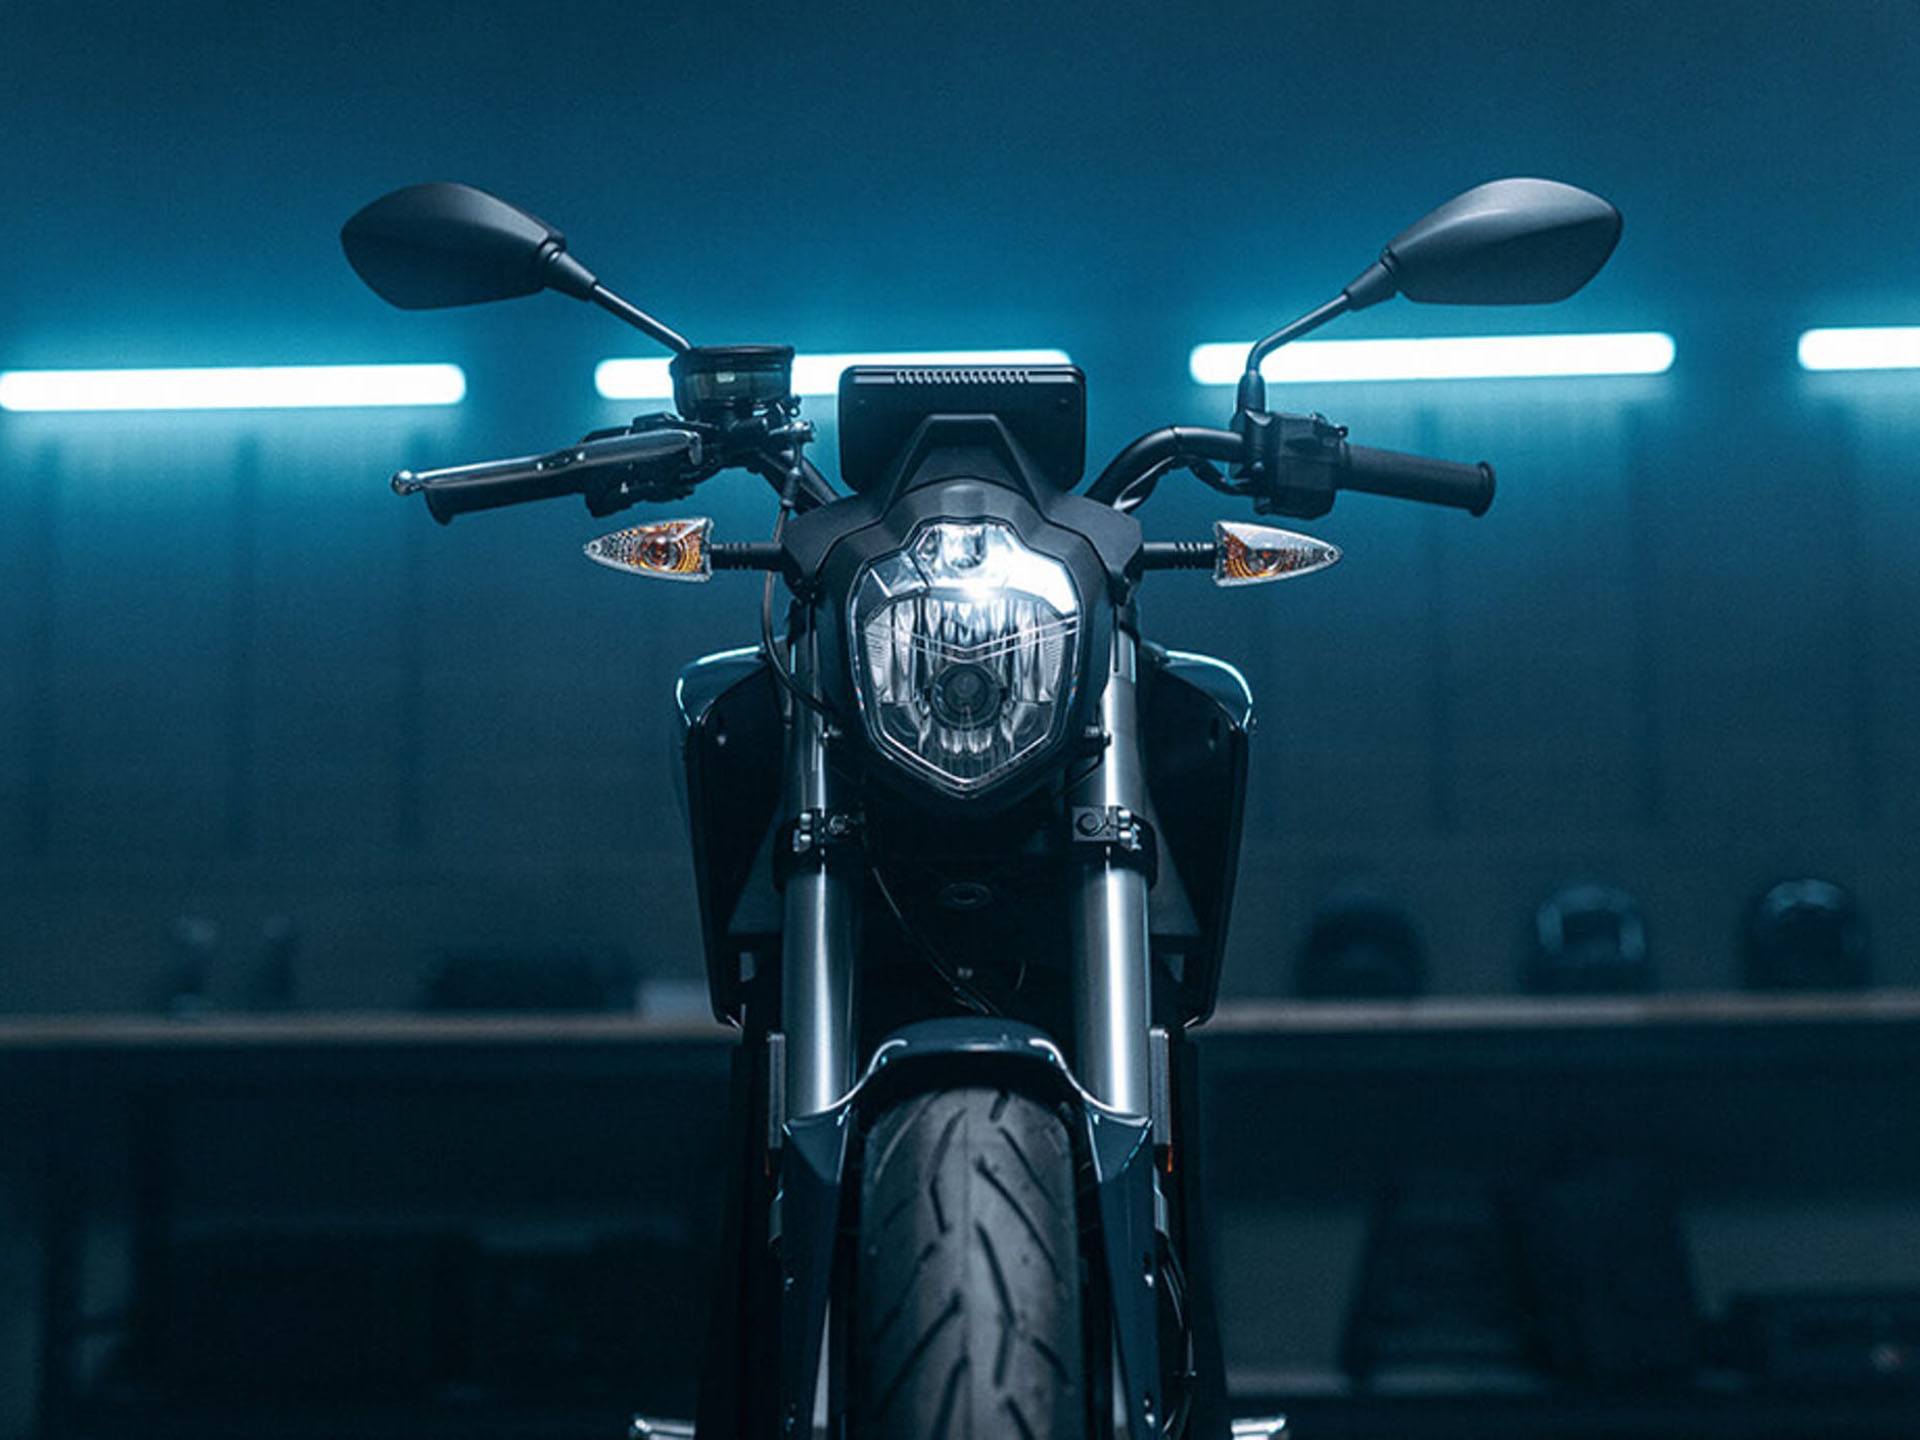 2022 Zero Motorcycles S ZF7.2 in Fort Lauderdale, Florida - Photo 11